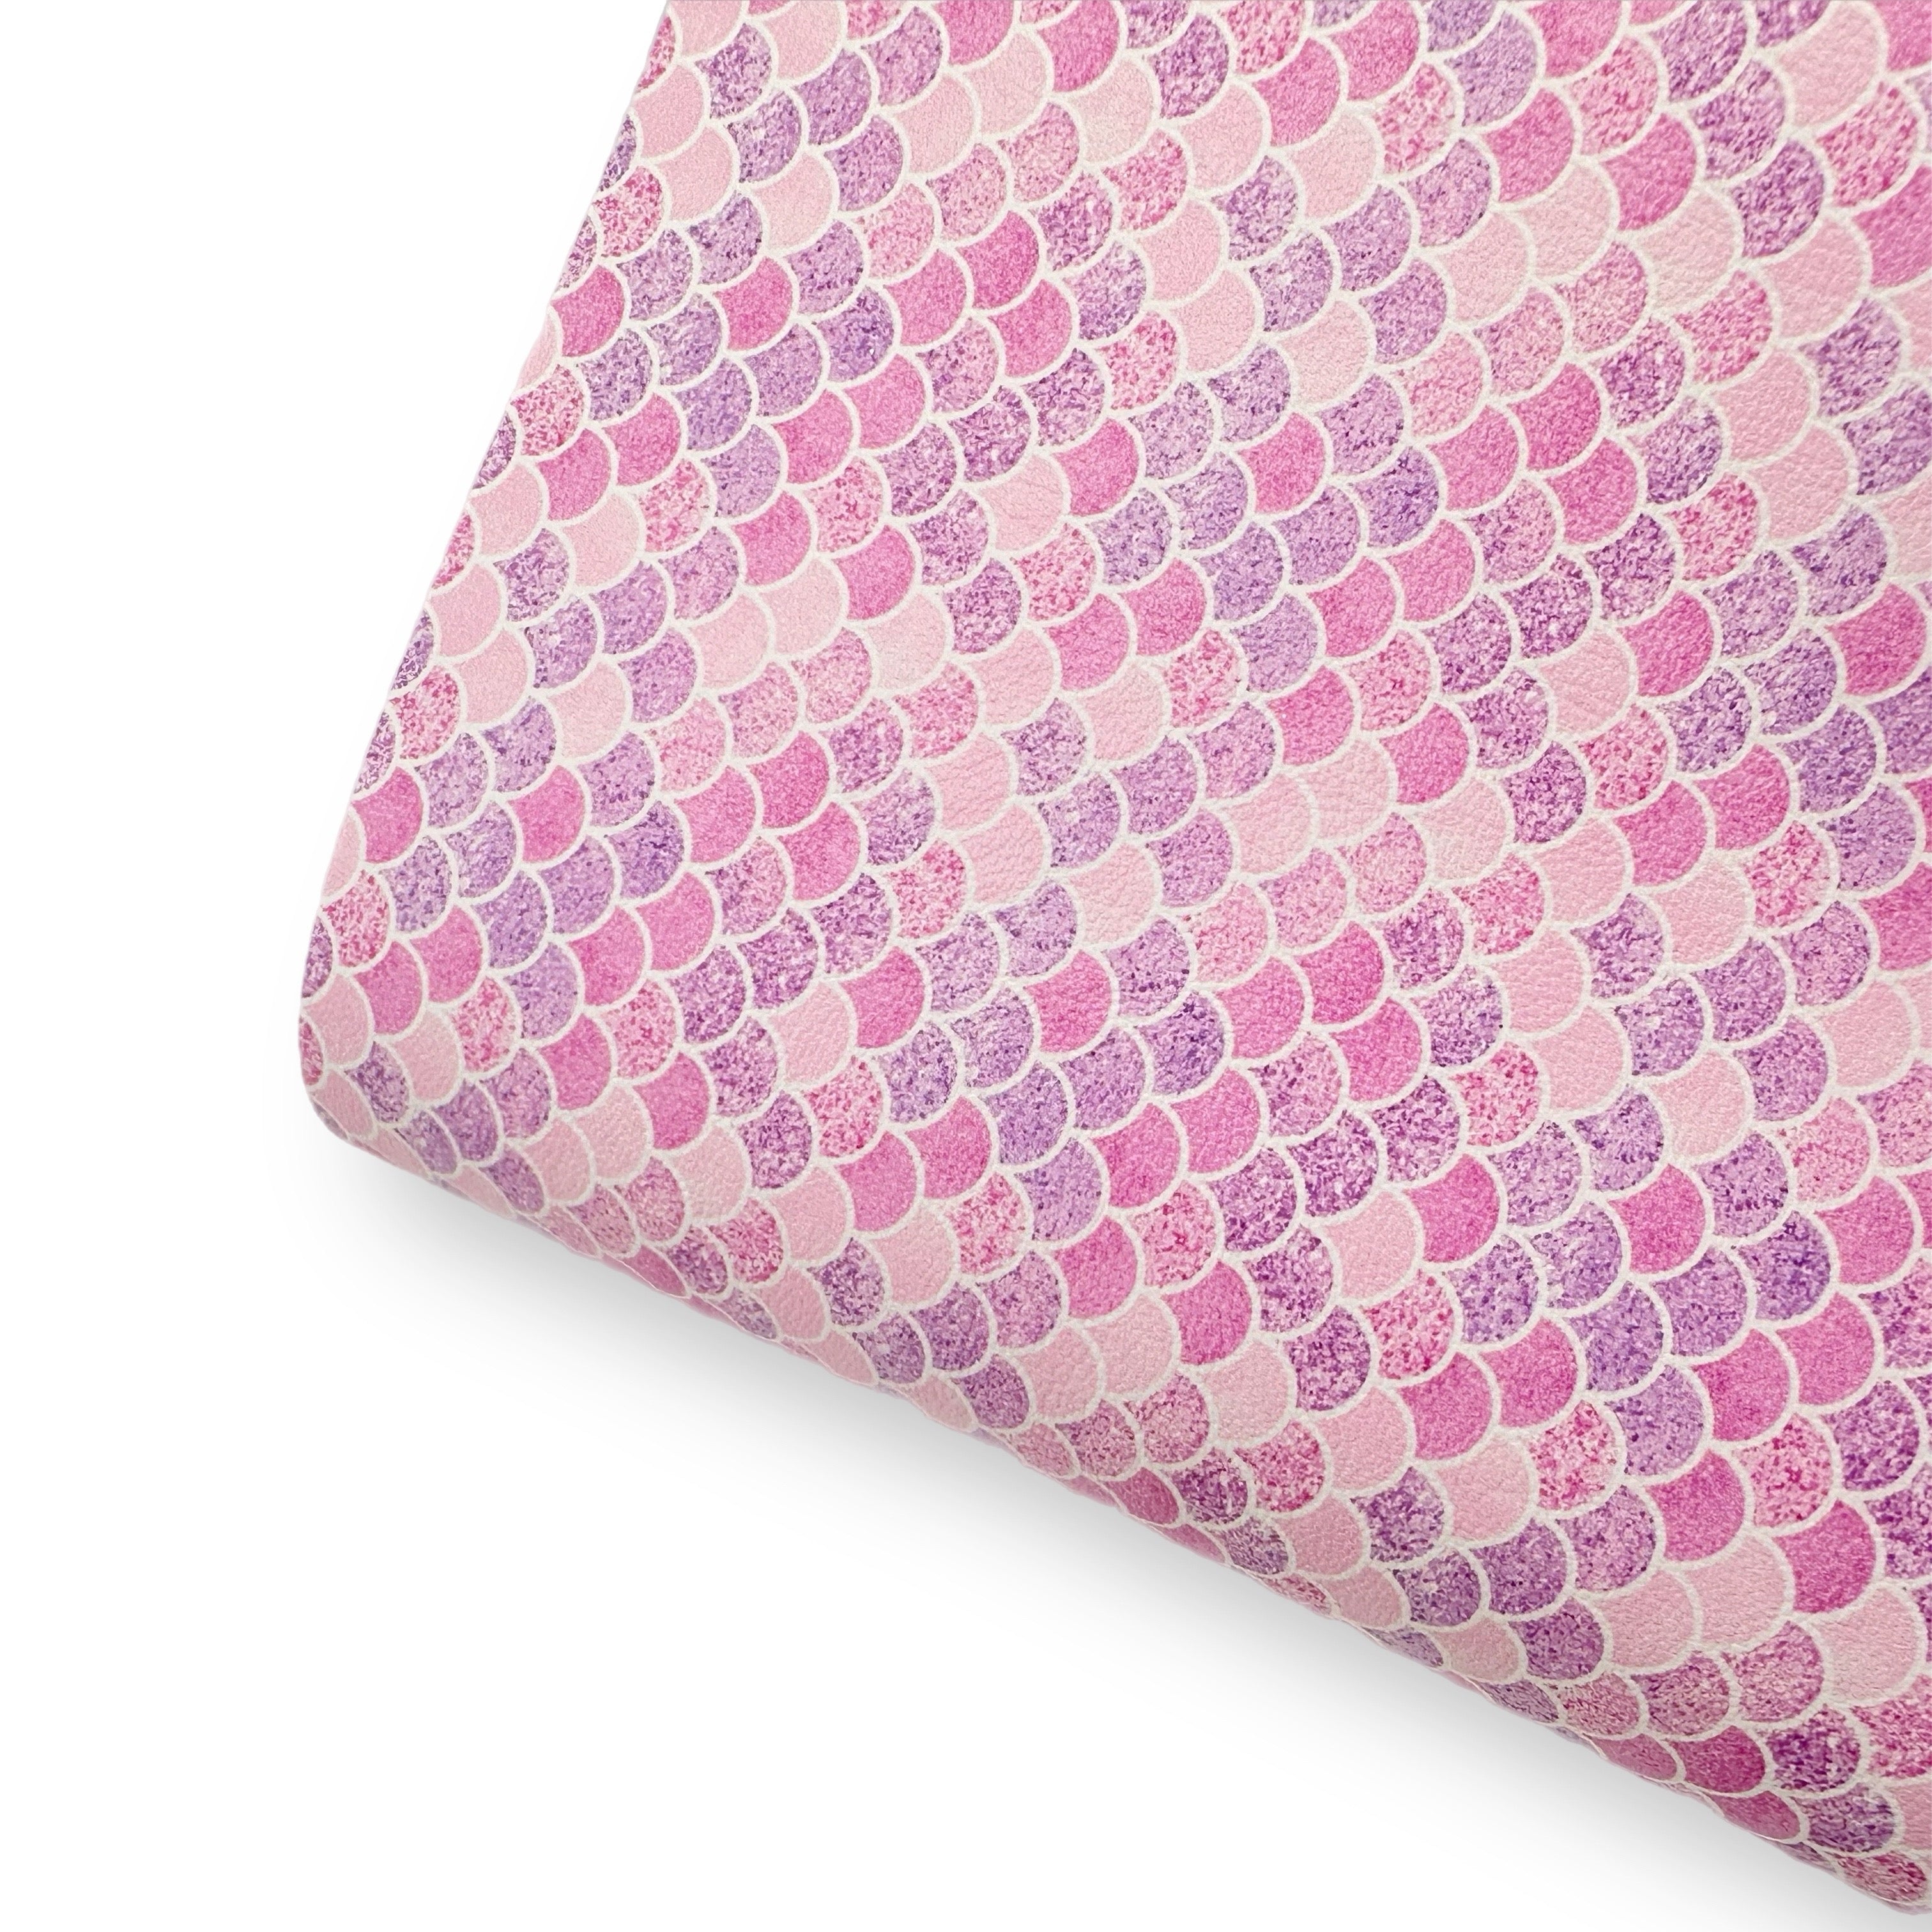 Pink Glitter Mermaid Scales Premium Faux Leather Fabric